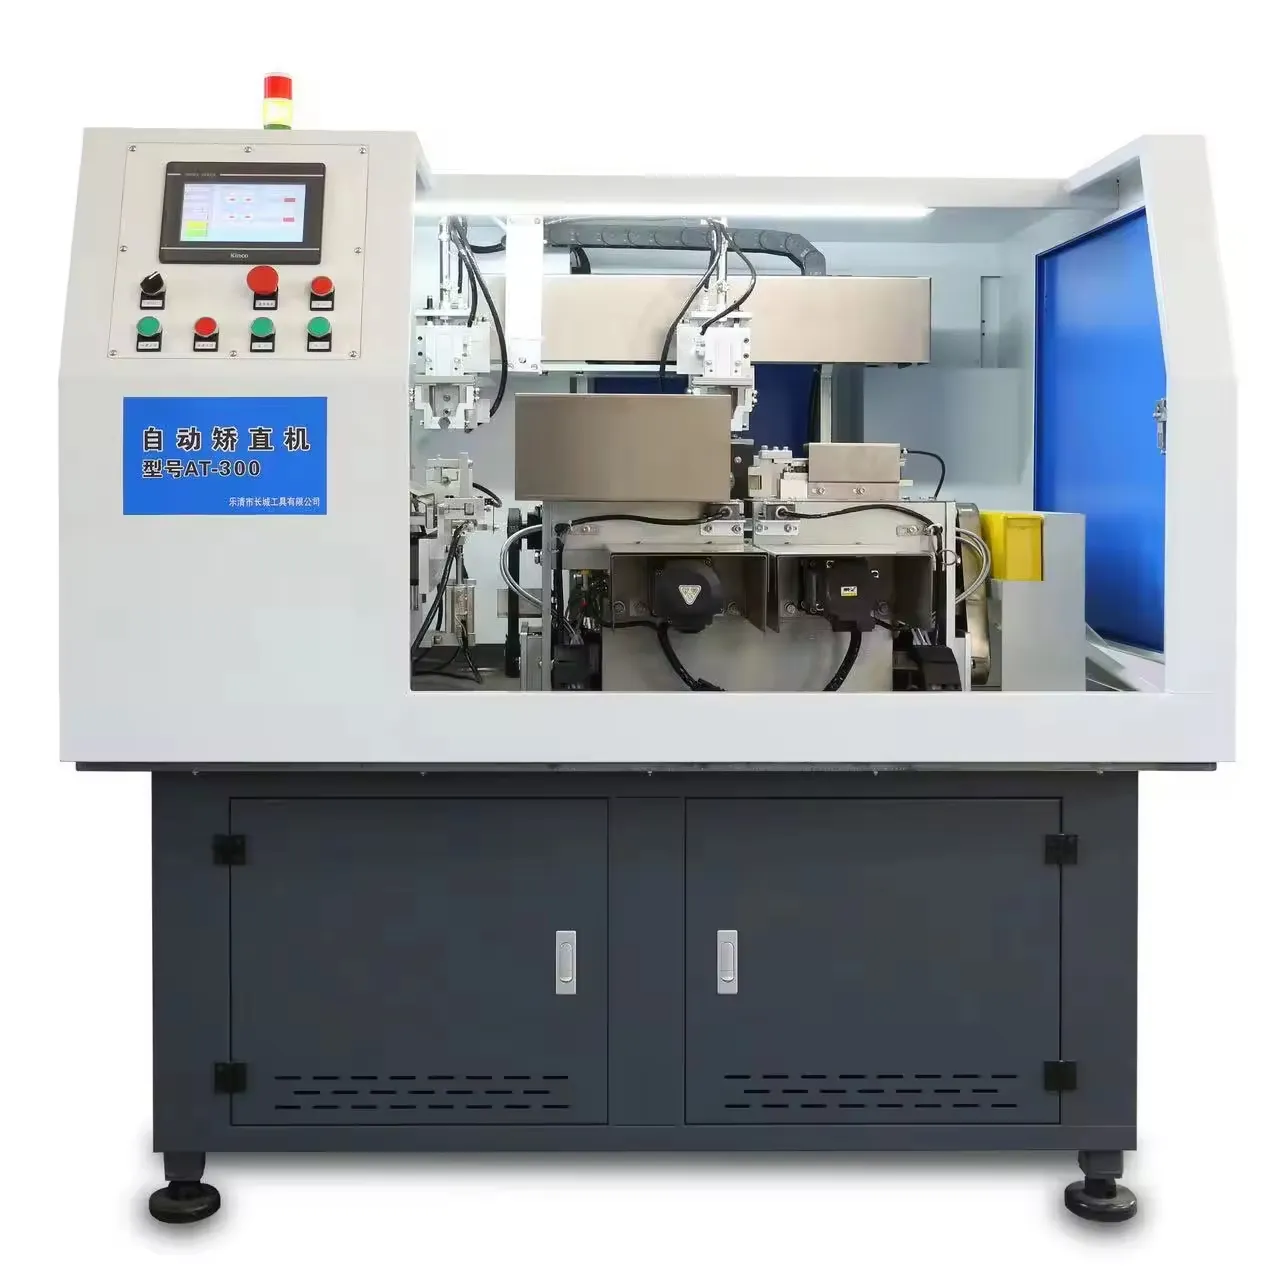 EU Certification Automatic Straightening Machine For Drill Bits